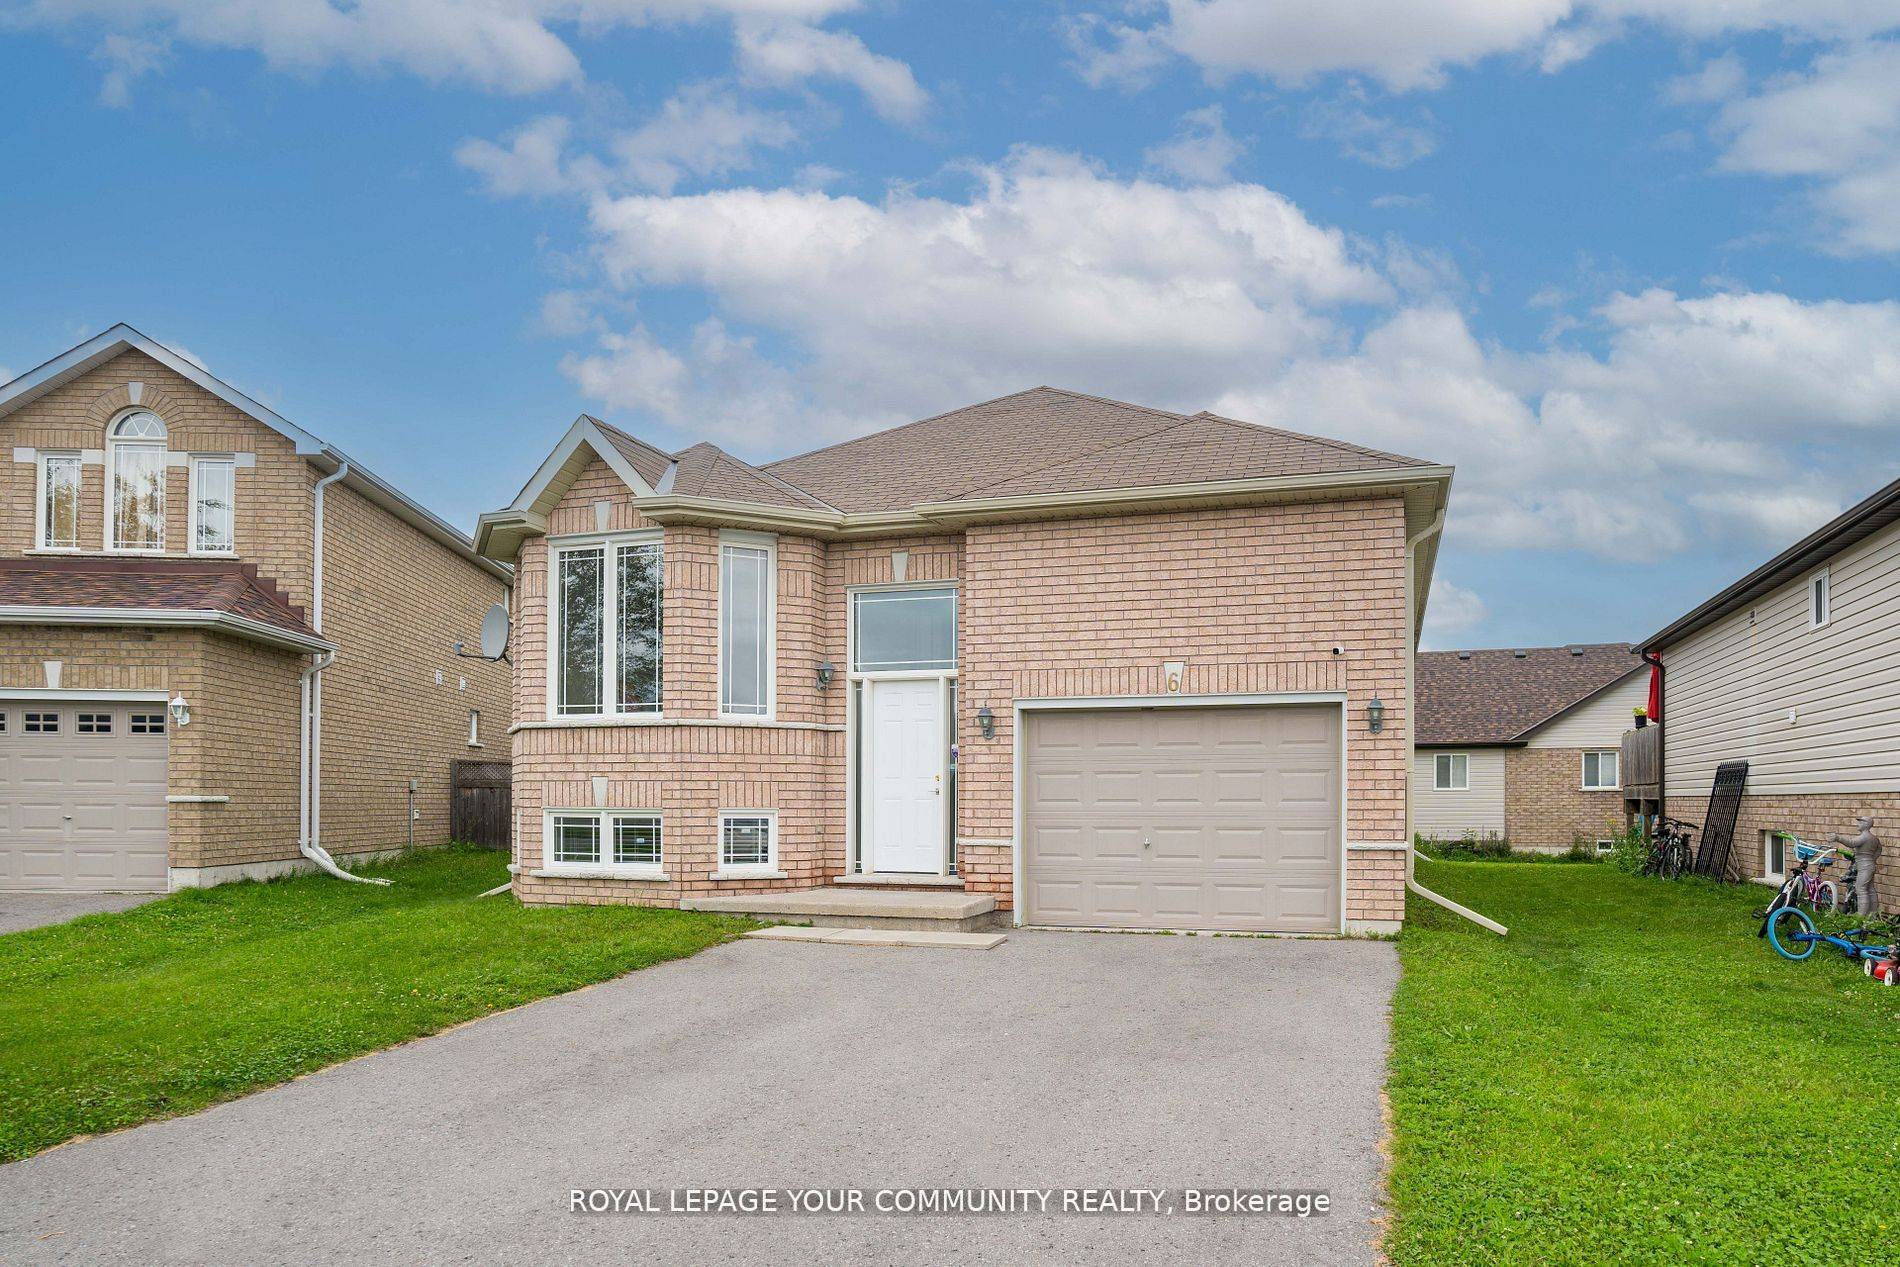 Welcome to 6 McGregor Crt, a charming 2100 sqft bungalow in Peterborough, ON.